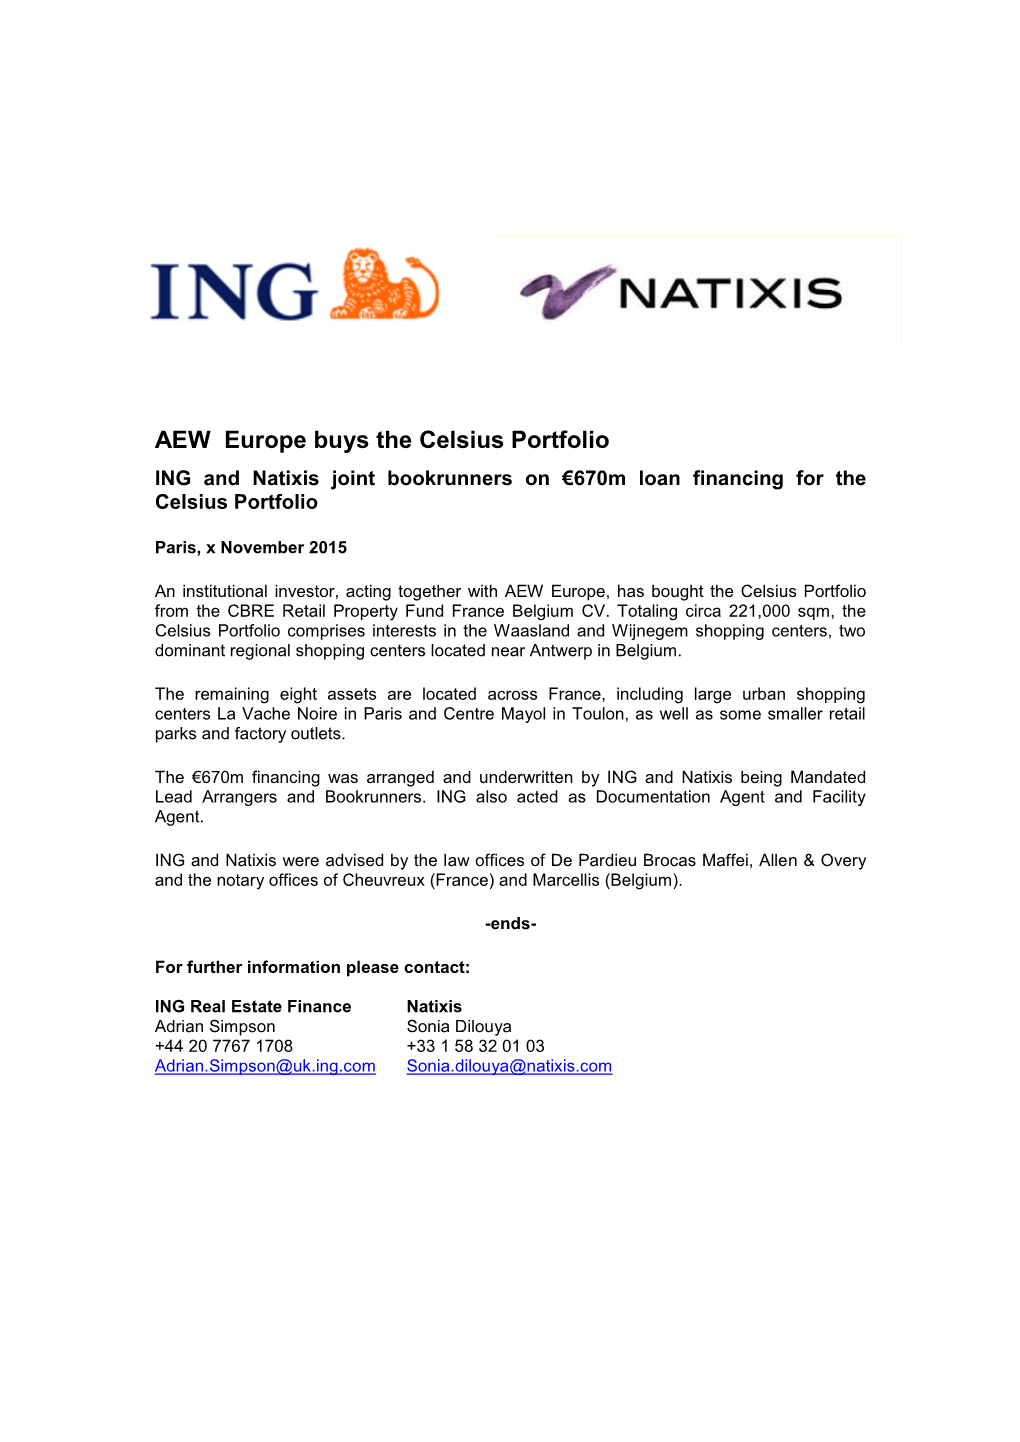 AEW Europe Buys the Celsius Portfolio ING and Natixis Joint Bookrunners on €670M Loan Financing for the Celsius Portfolio